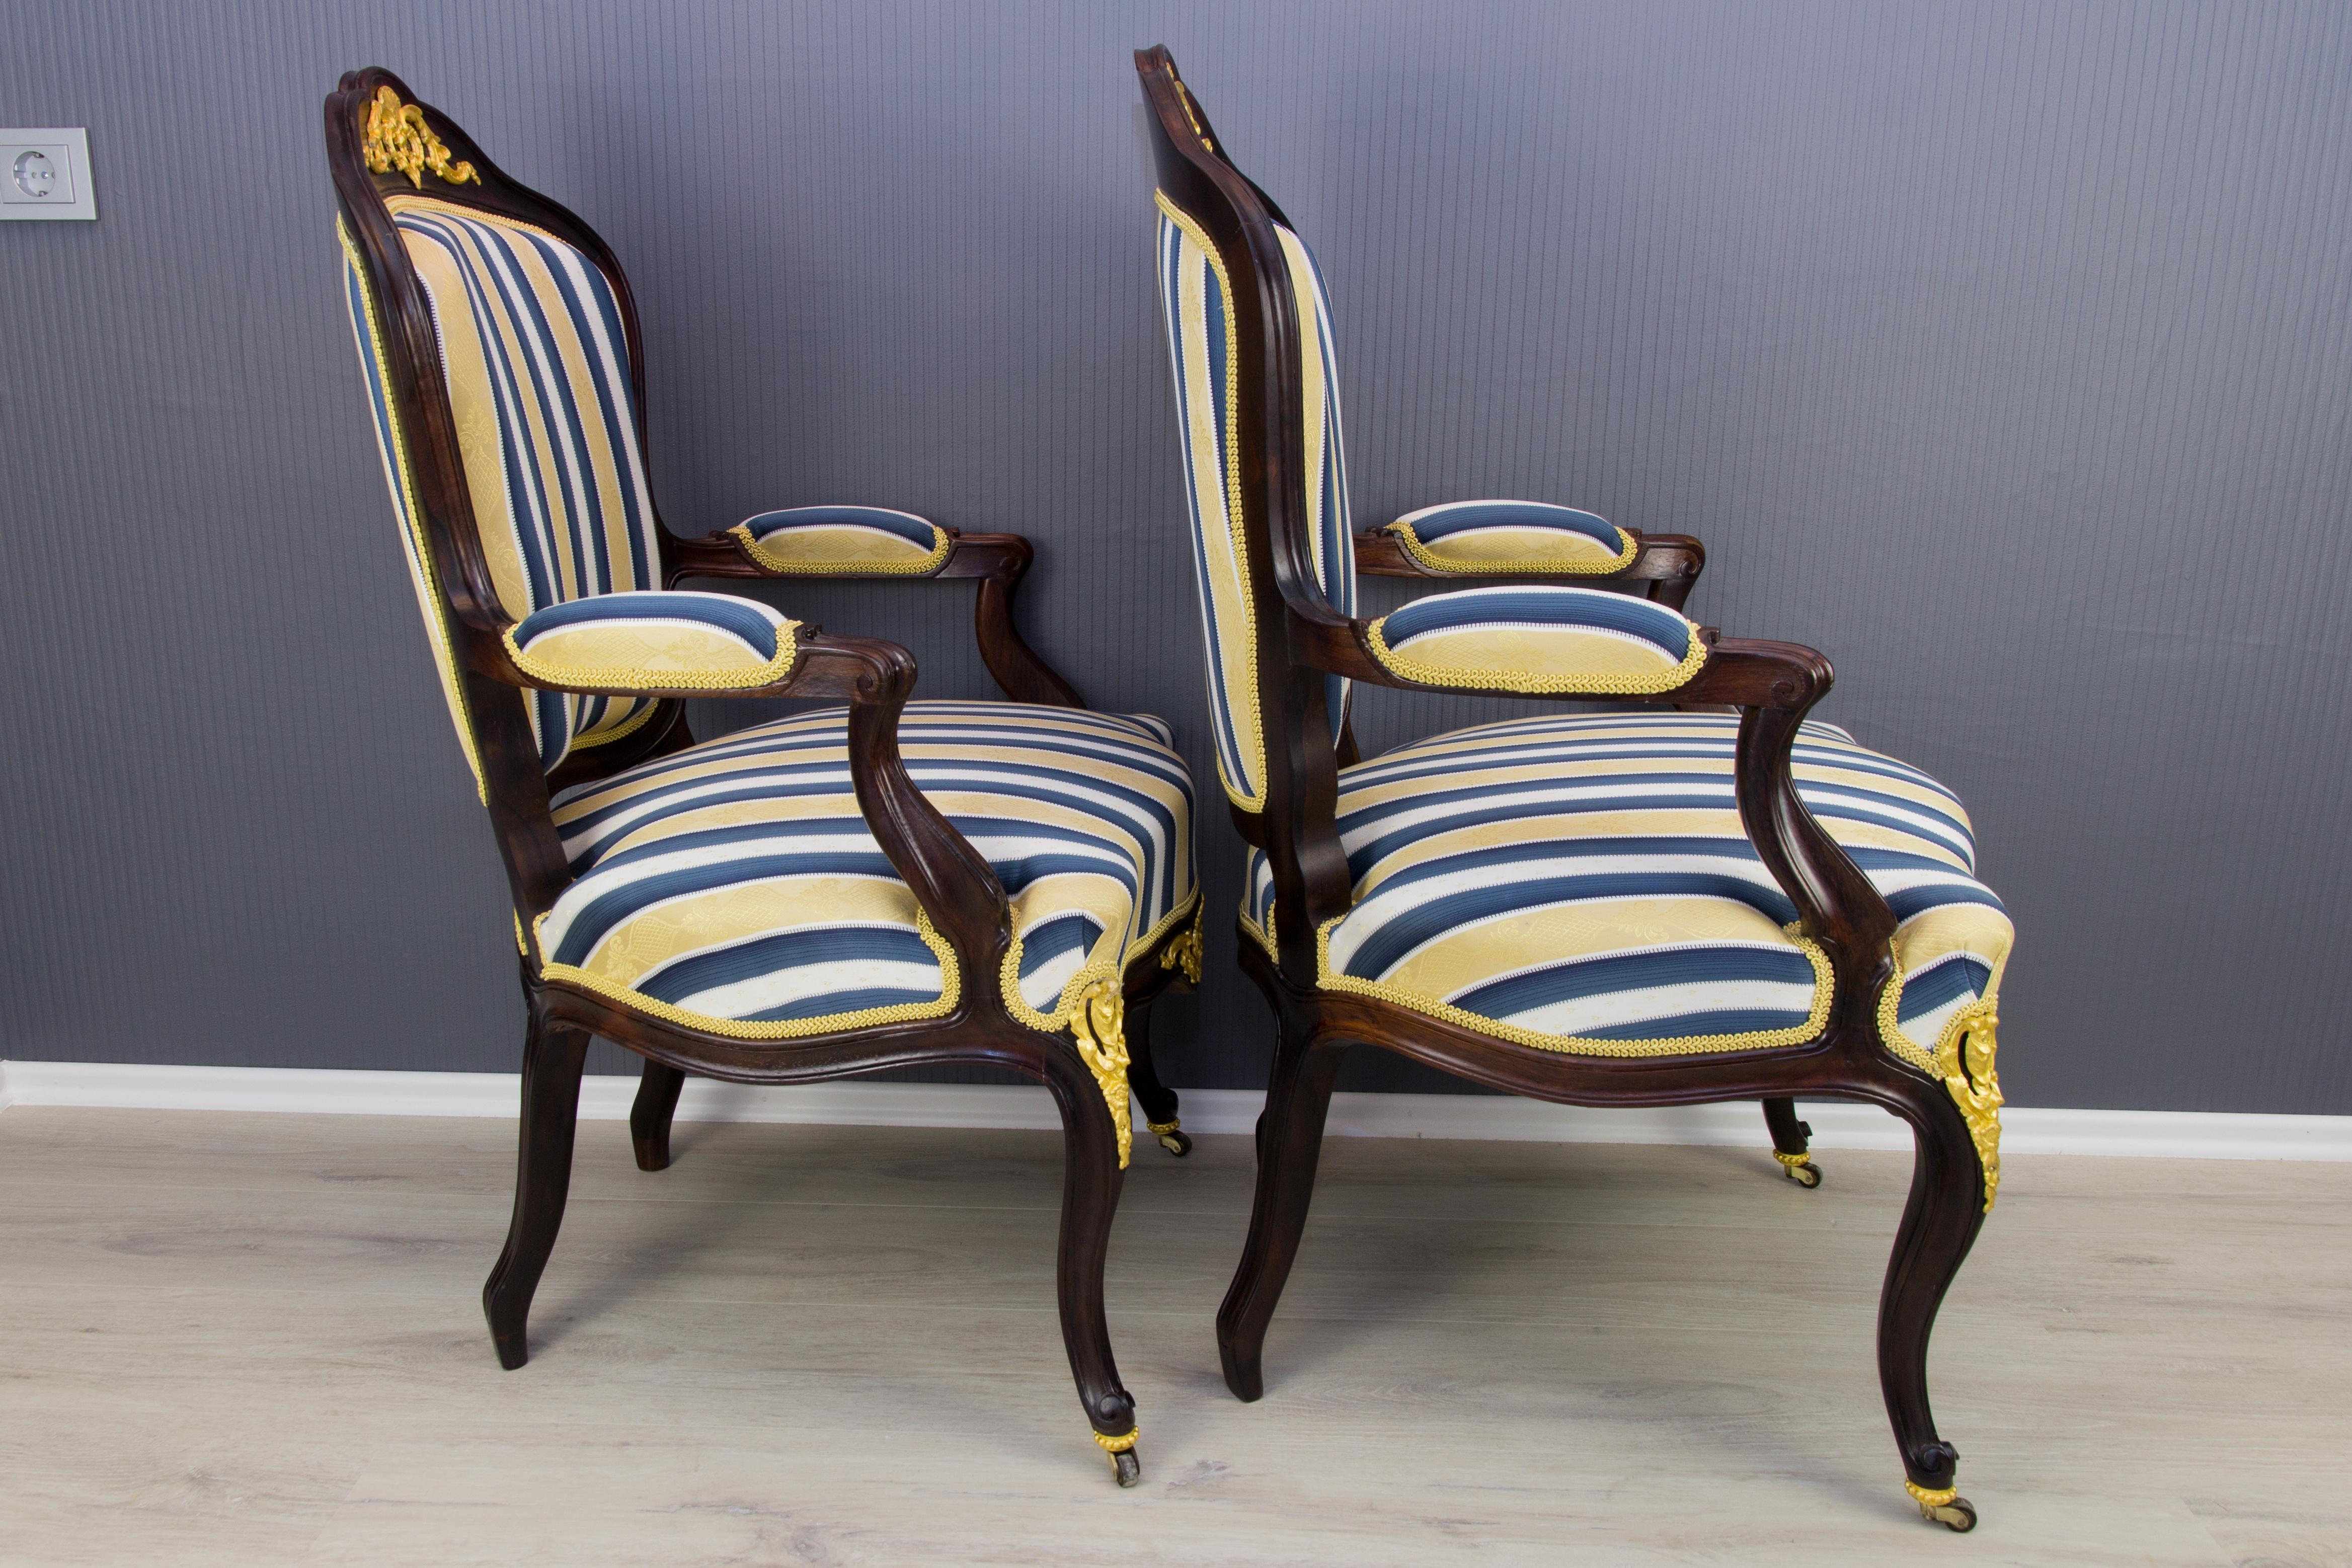 Pair of 19th Century Louis XV Style Walnut Armchairs in Golden, Blue, and White  For Sale 8